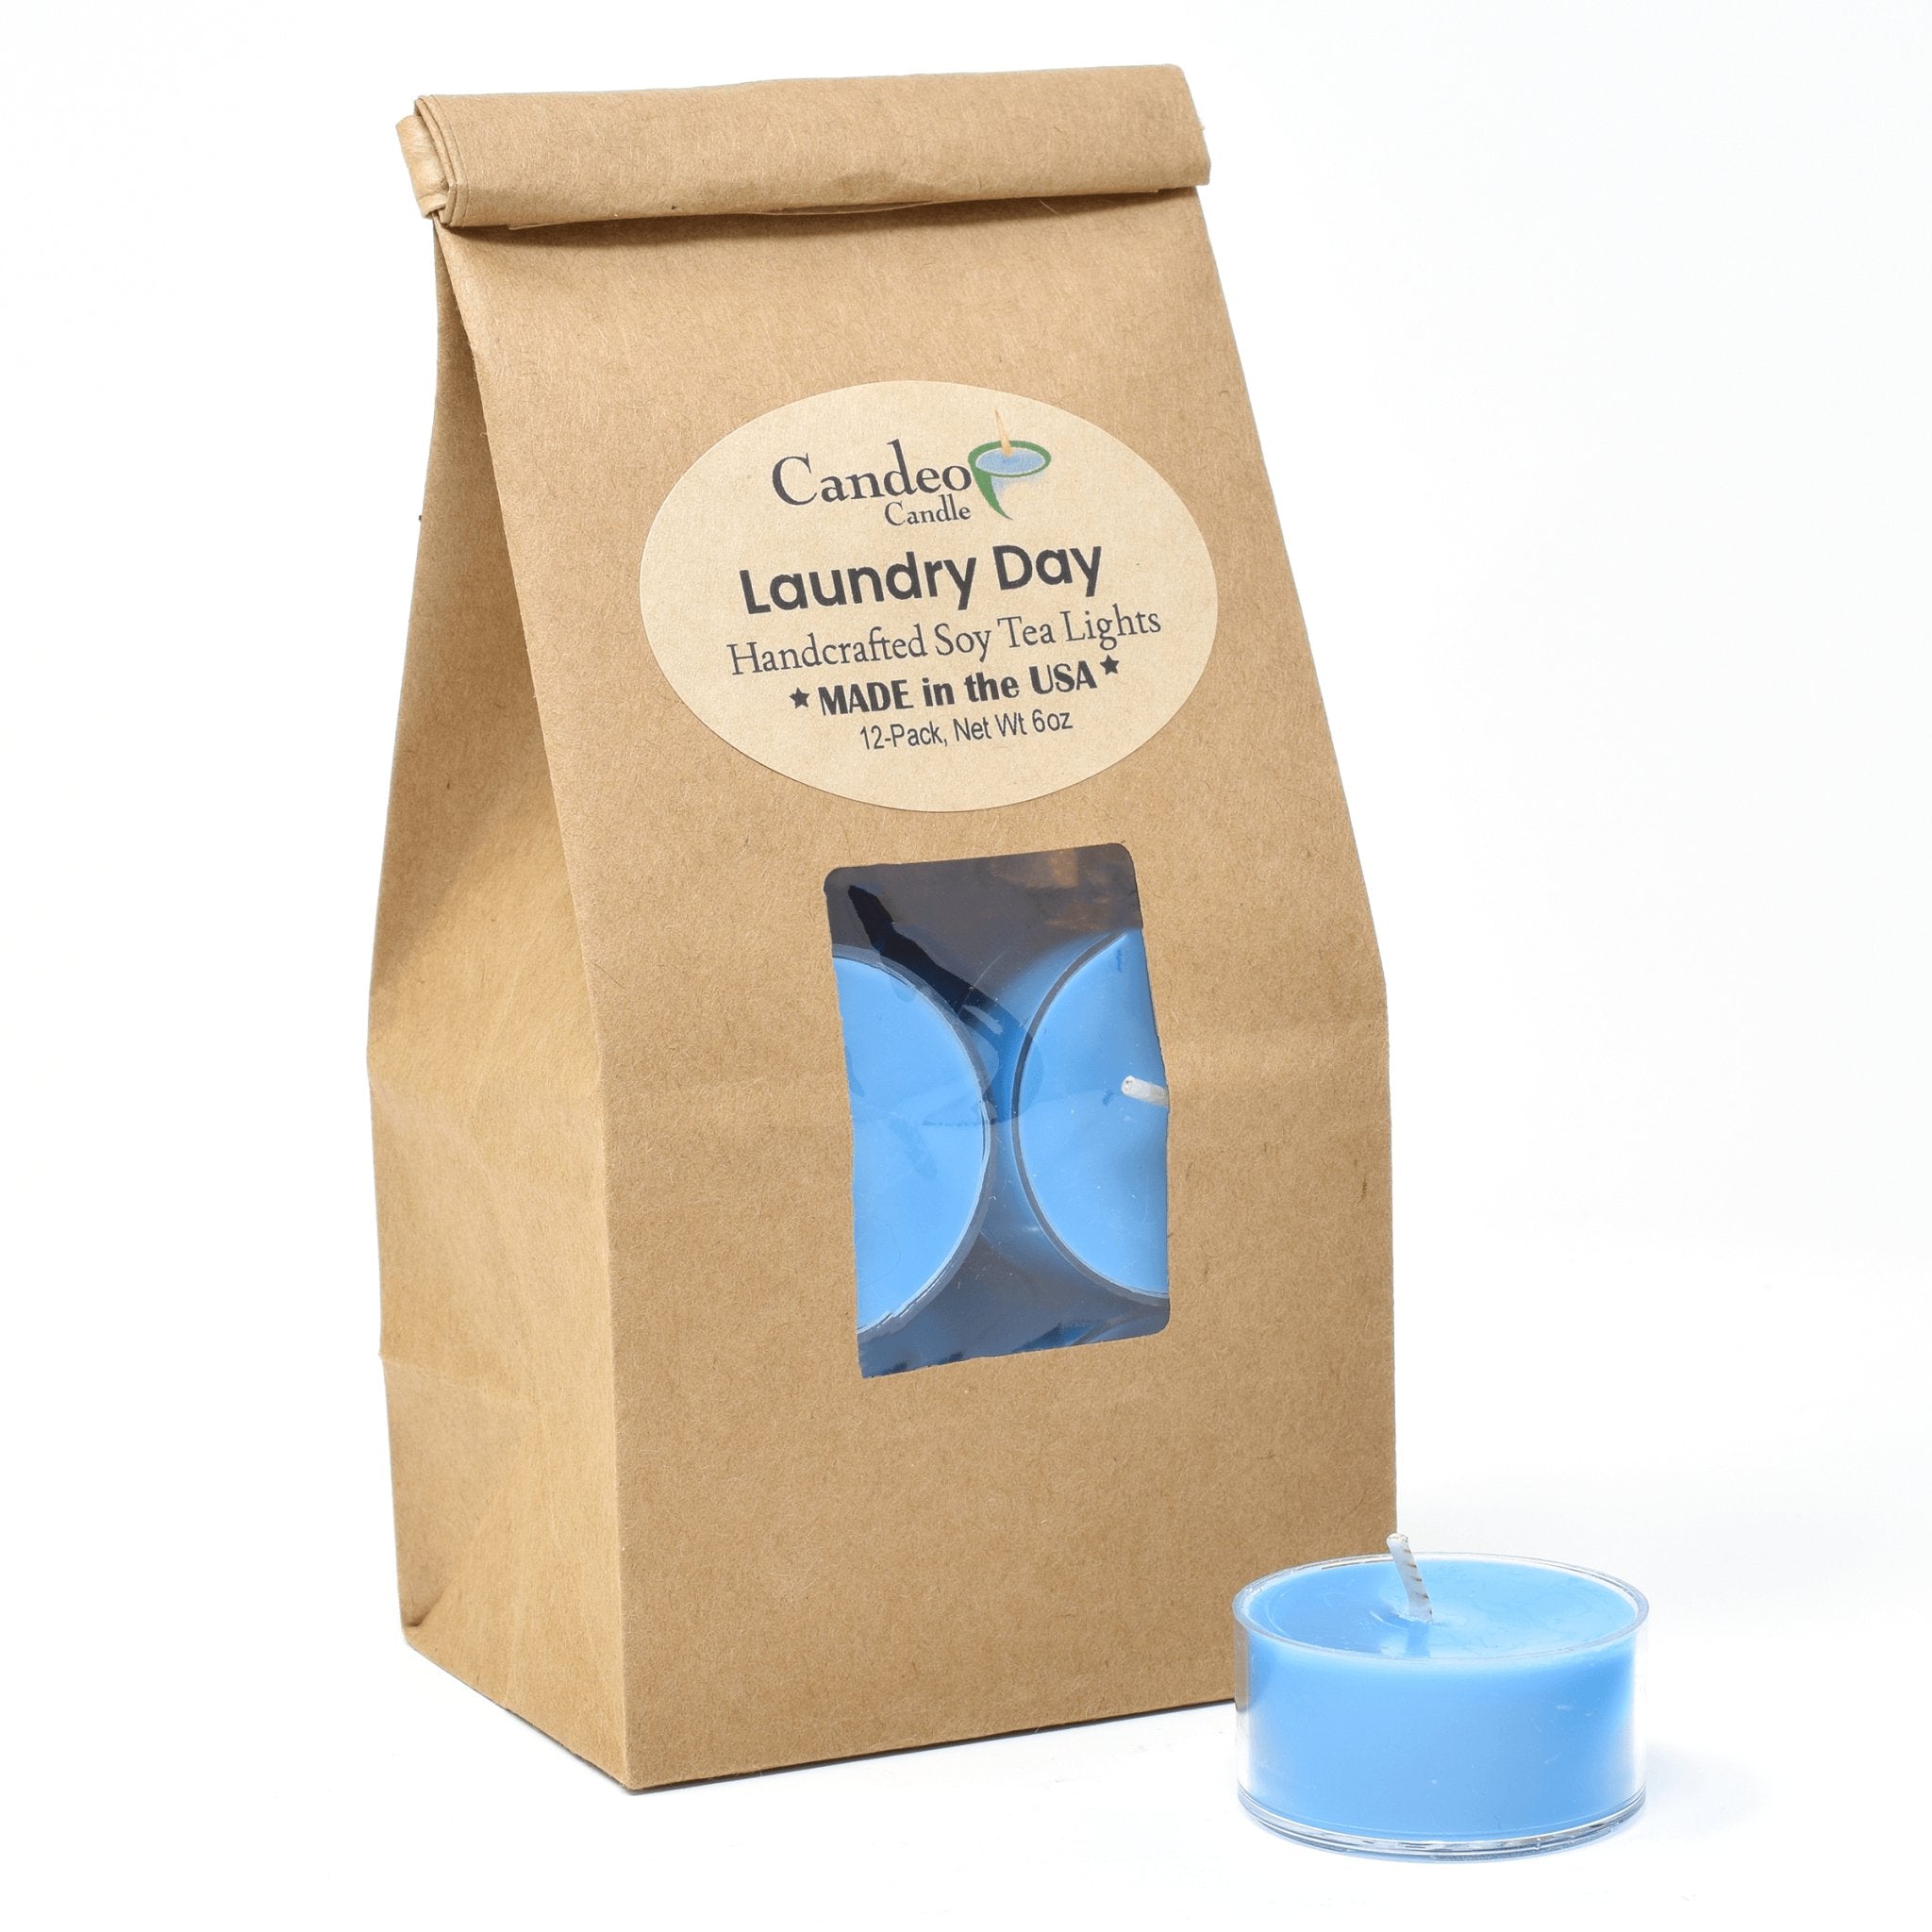 Laundry Day, Soy Tea Light 12-Pack - Candeo Candle